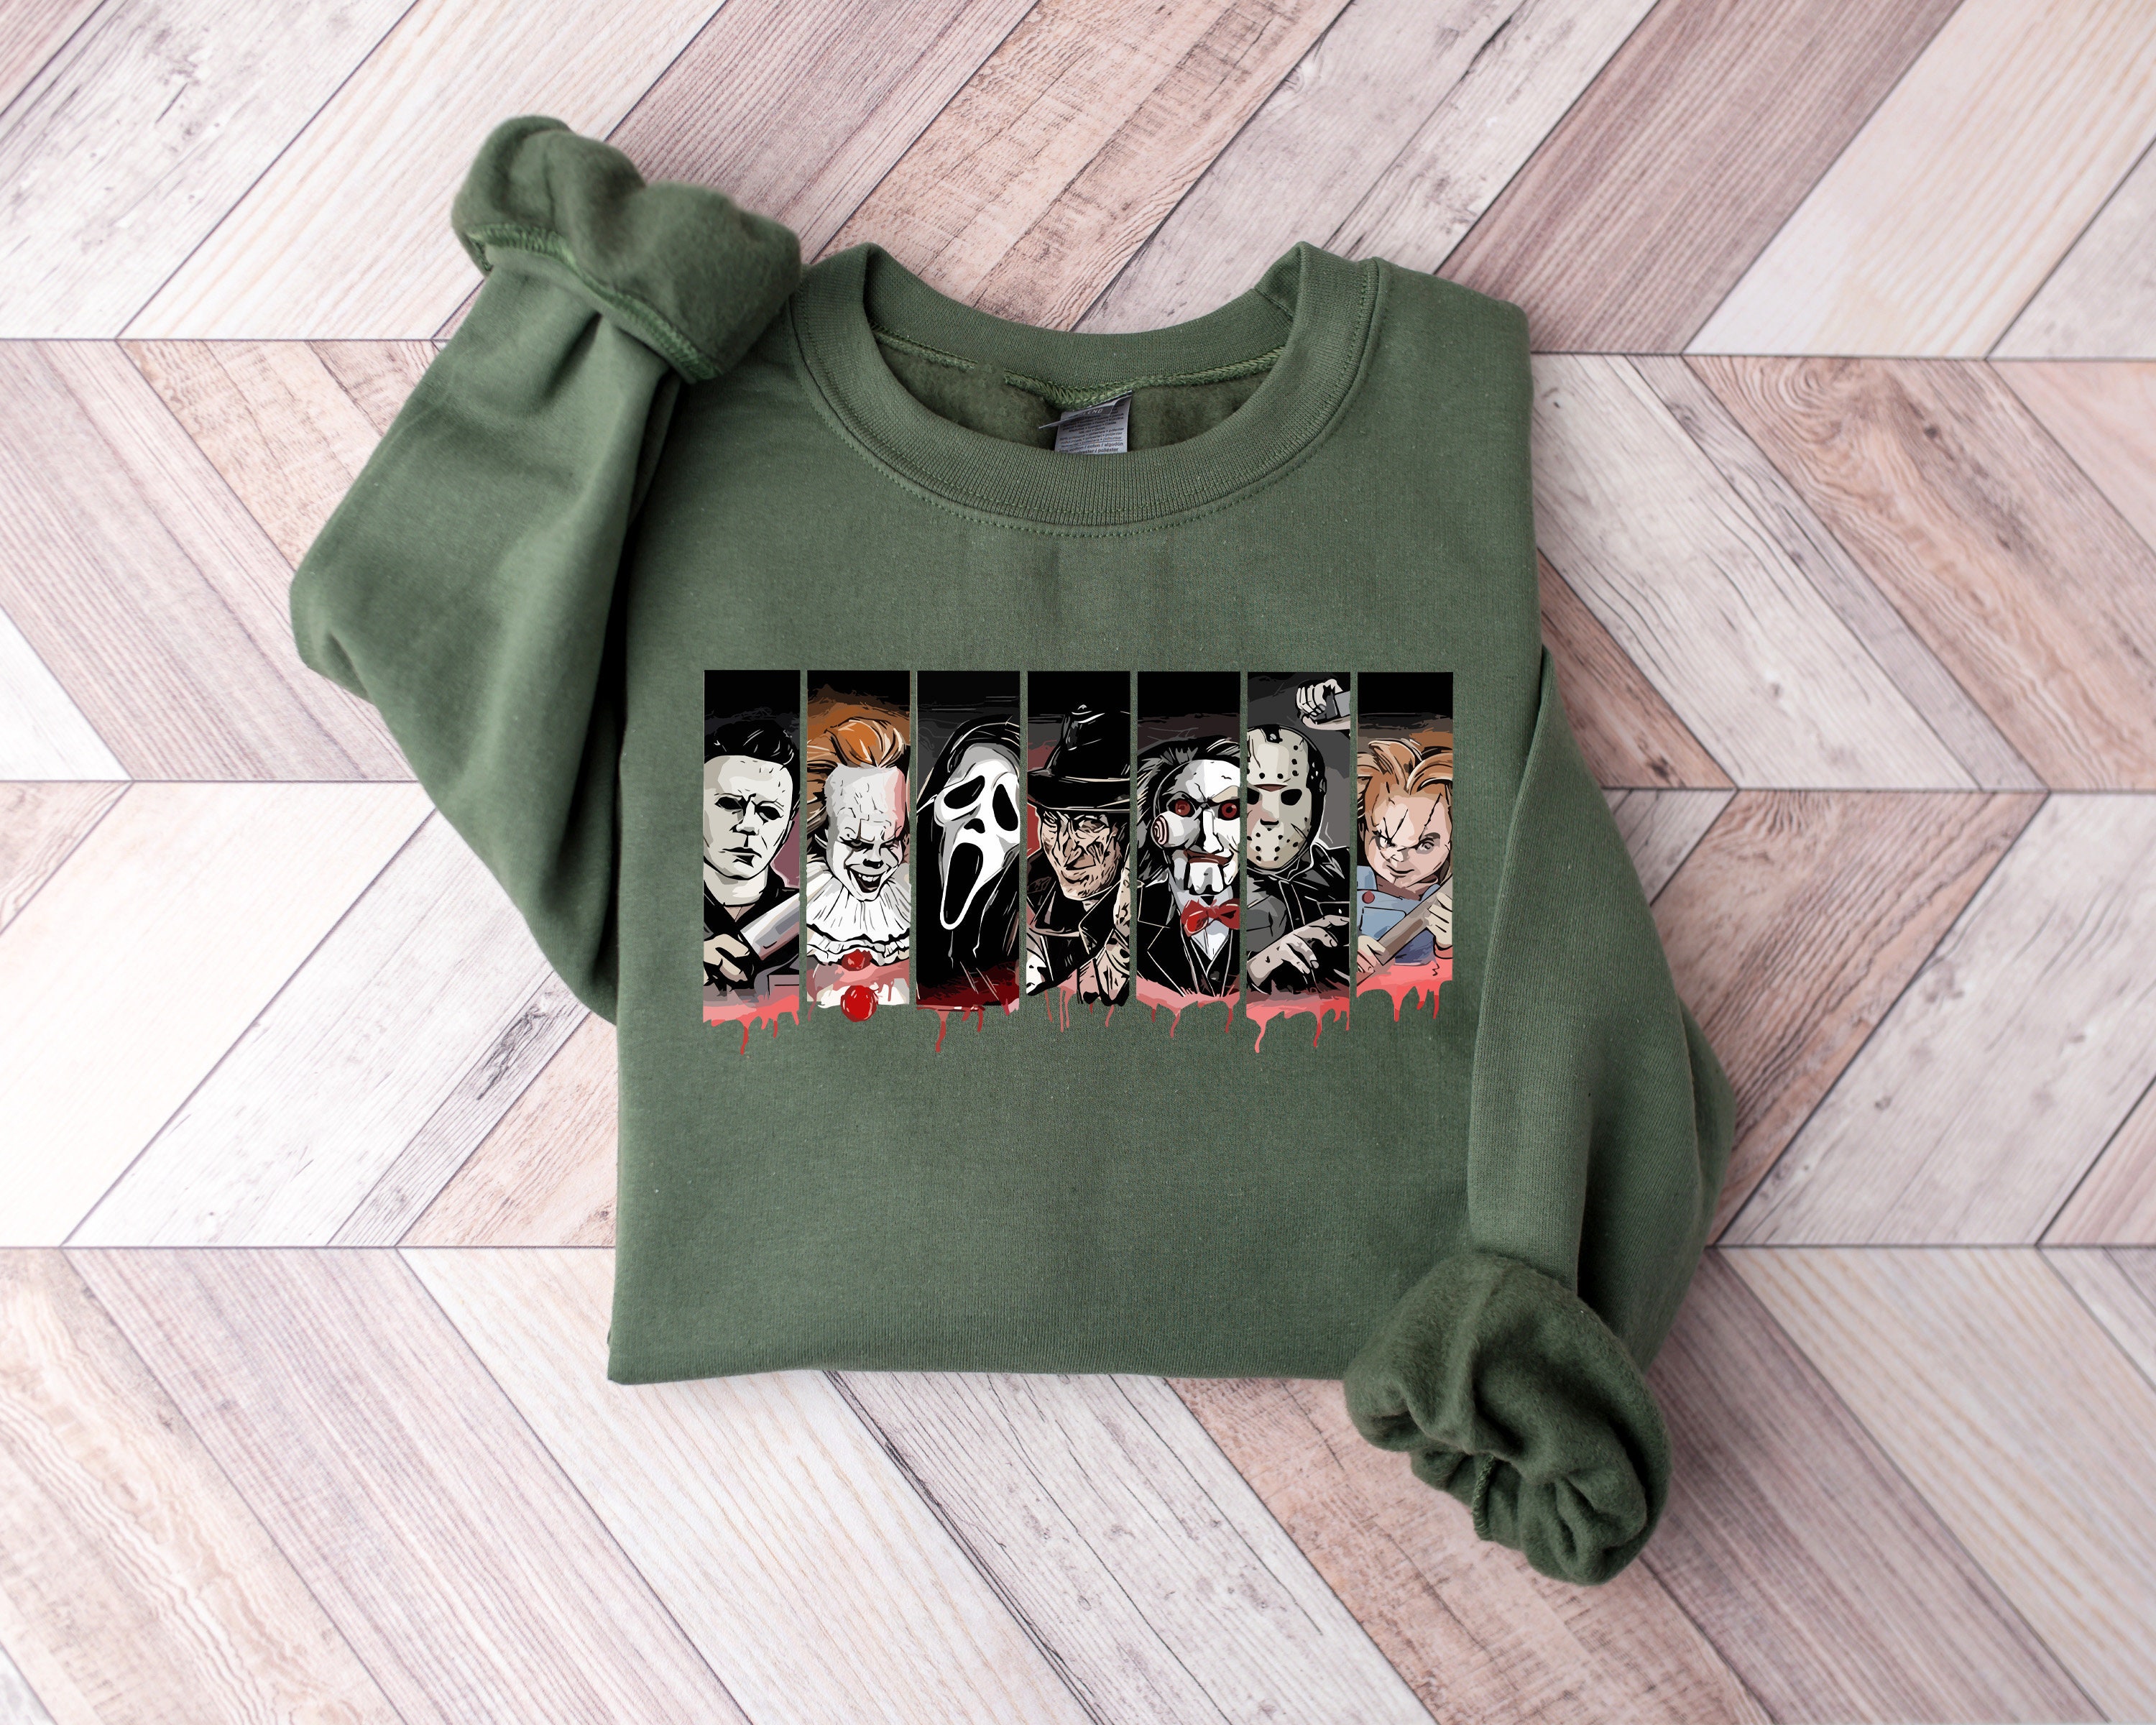 Discover Halloween Horror Movie Characters Sweatshirt, Scary Movies Shirt, Halloween Gifts, Halloween Squad Goals Sweatshirt, Horror Sweater